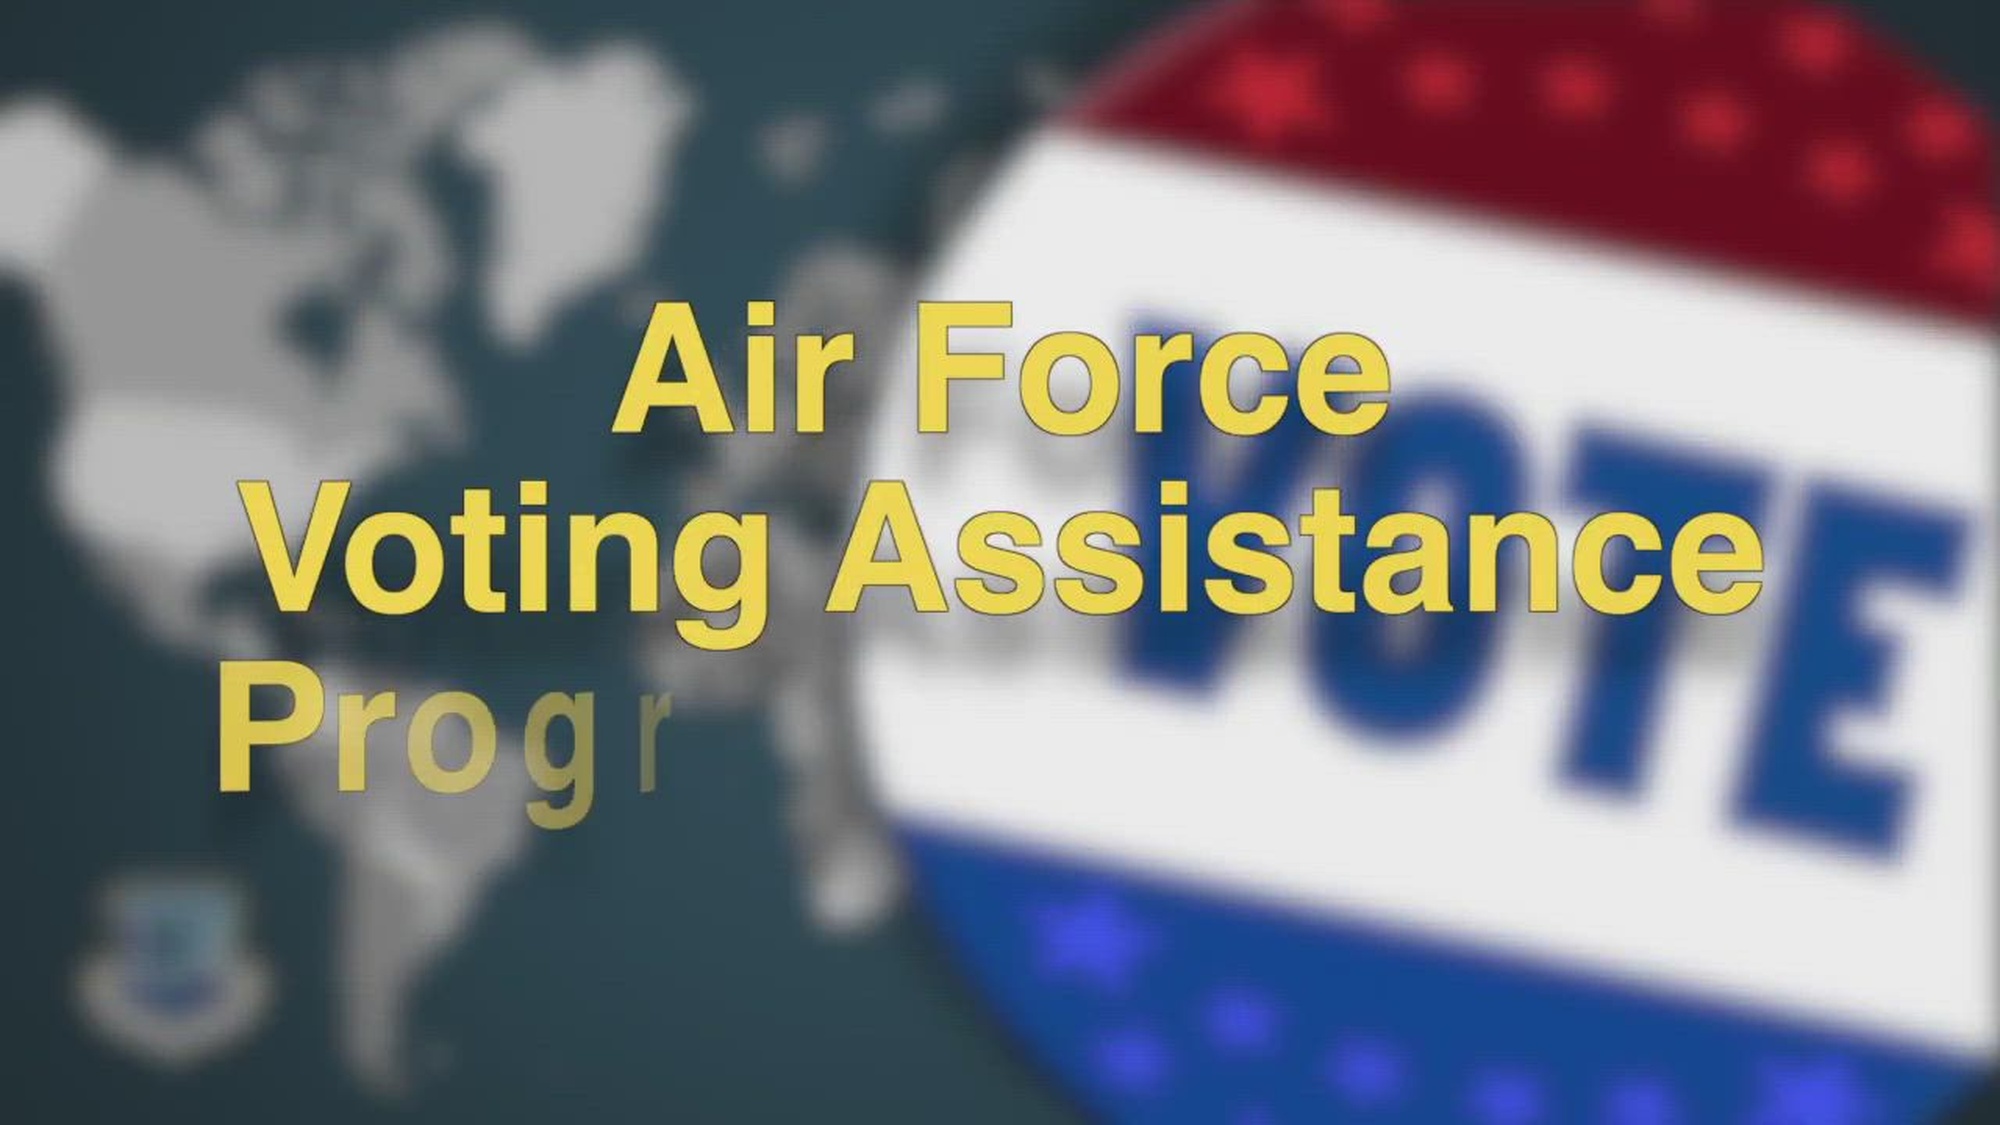 The Airman & Family Readiness Center serves as the installation's focal point for voting assistance.  The video highlights key roles and responsibilities which ensure Airmen are aware of and know how to exercise their right to vote absentee.
length 2:13